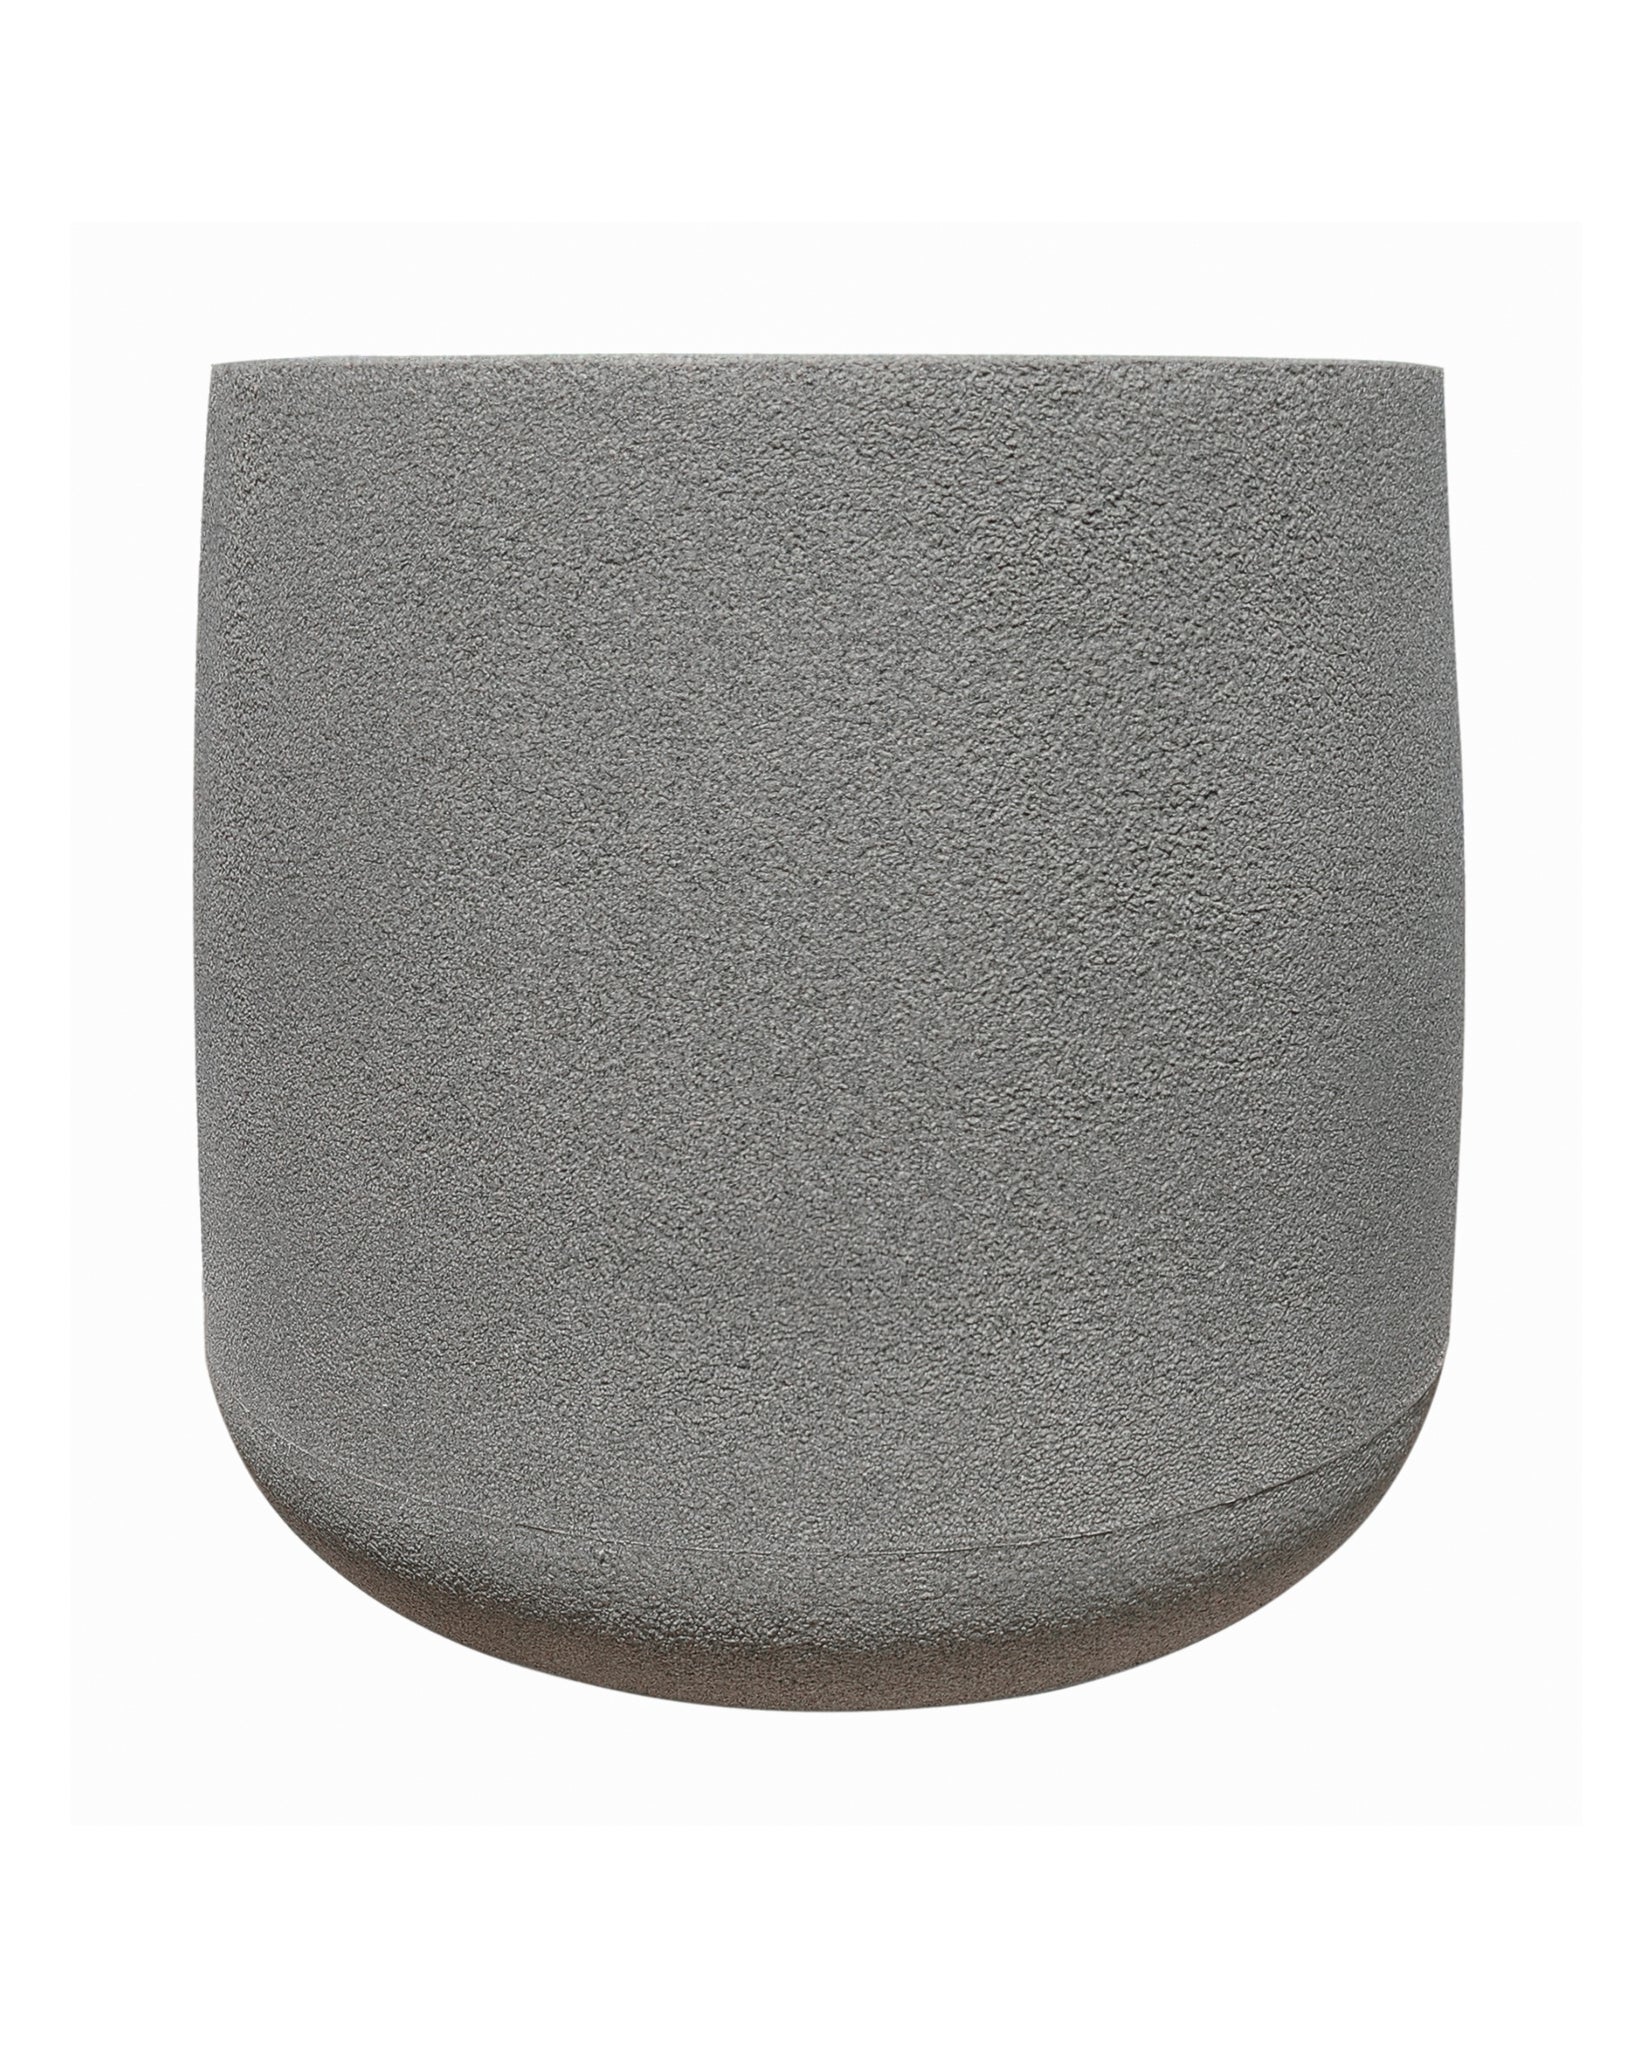 Side view of the medium Bios plant pot showing the beautiful textured finish and clean straight upright lines of the pot in colour Stone. Florastyle by Hingham.